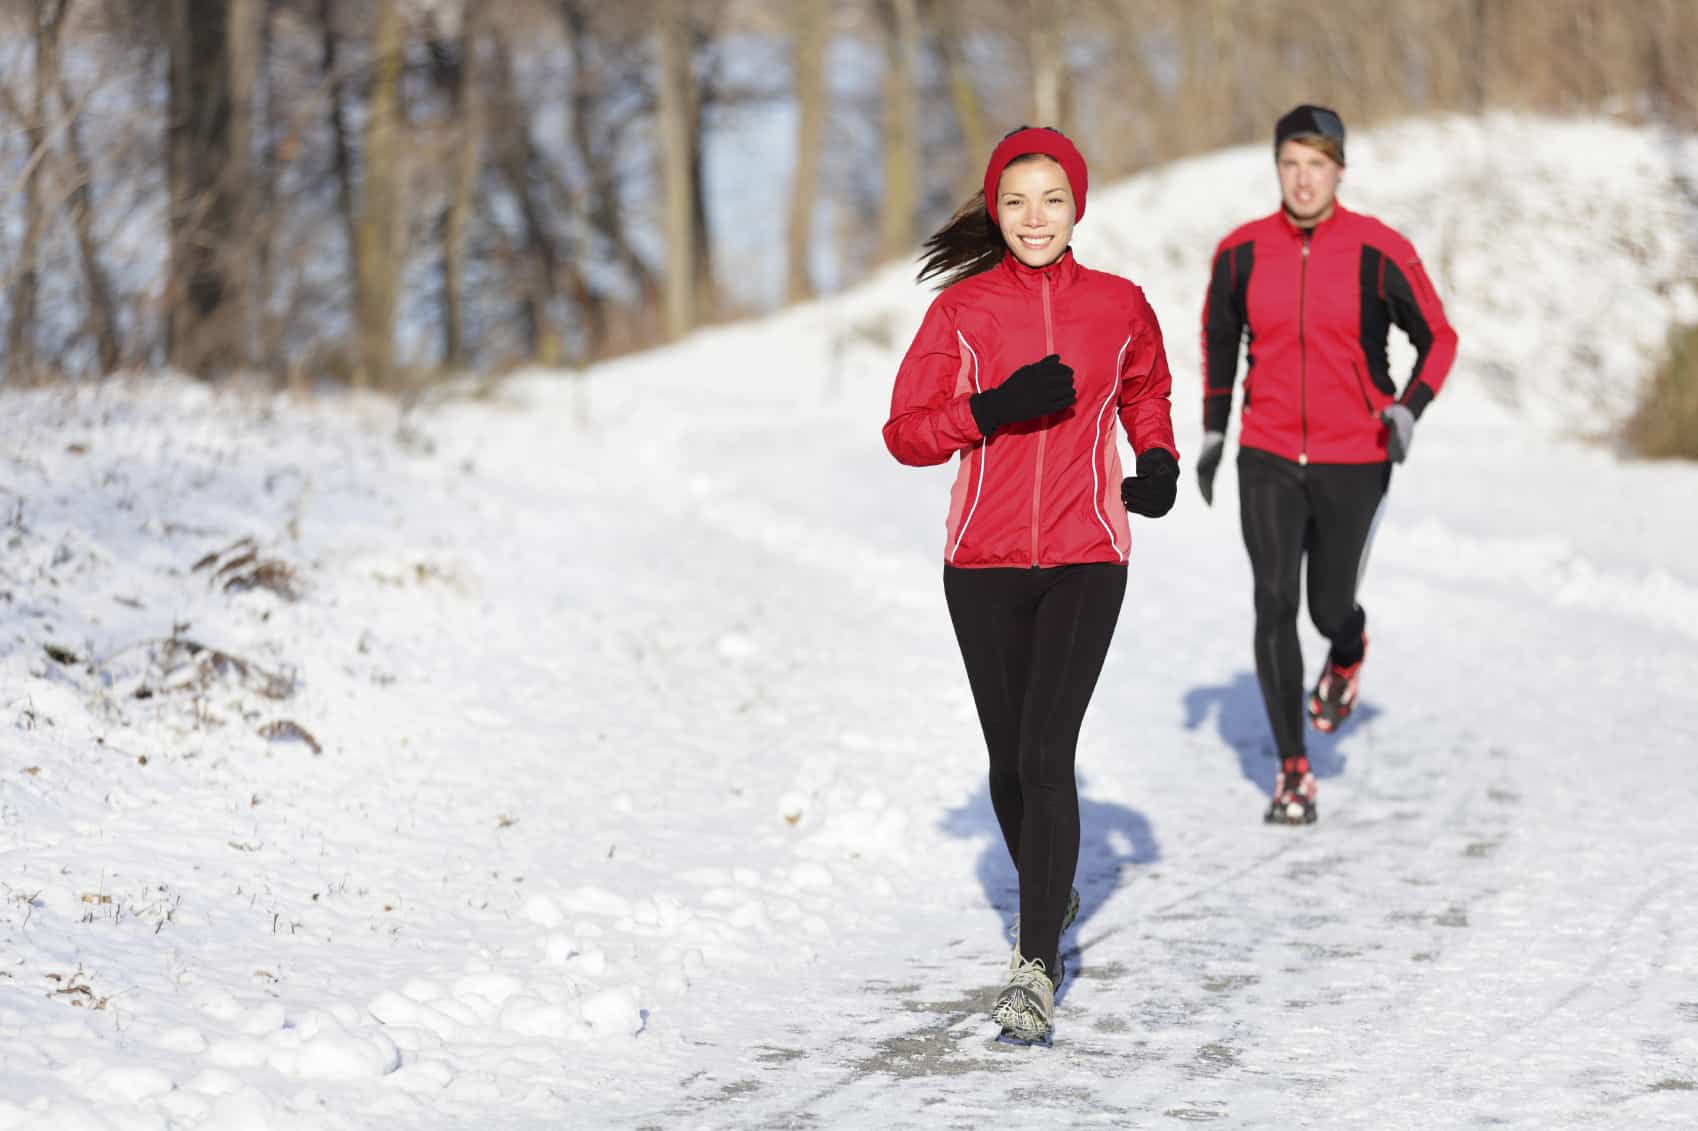 Looking for a healthier Valentine's Day? Try one of these active date ideas!